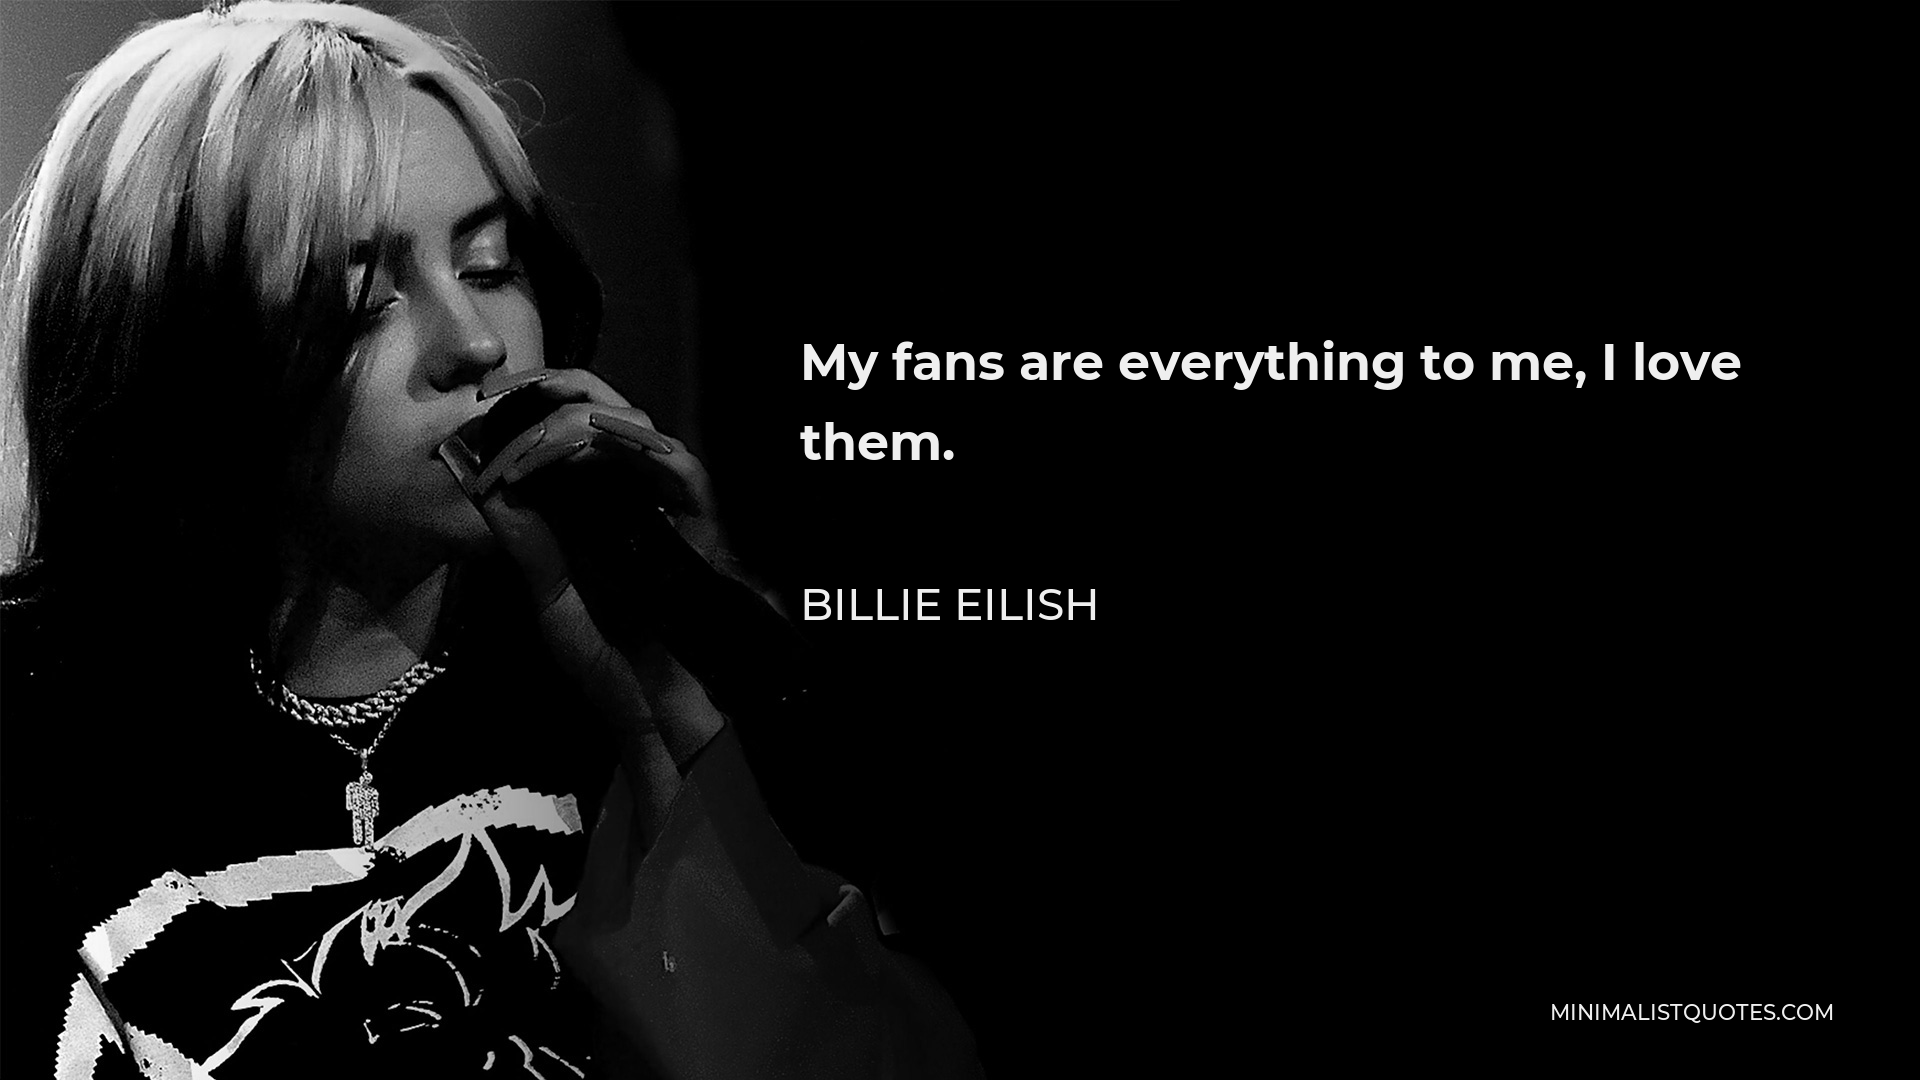 Billie Eilish Quote - My fans are everything to me, I love them.